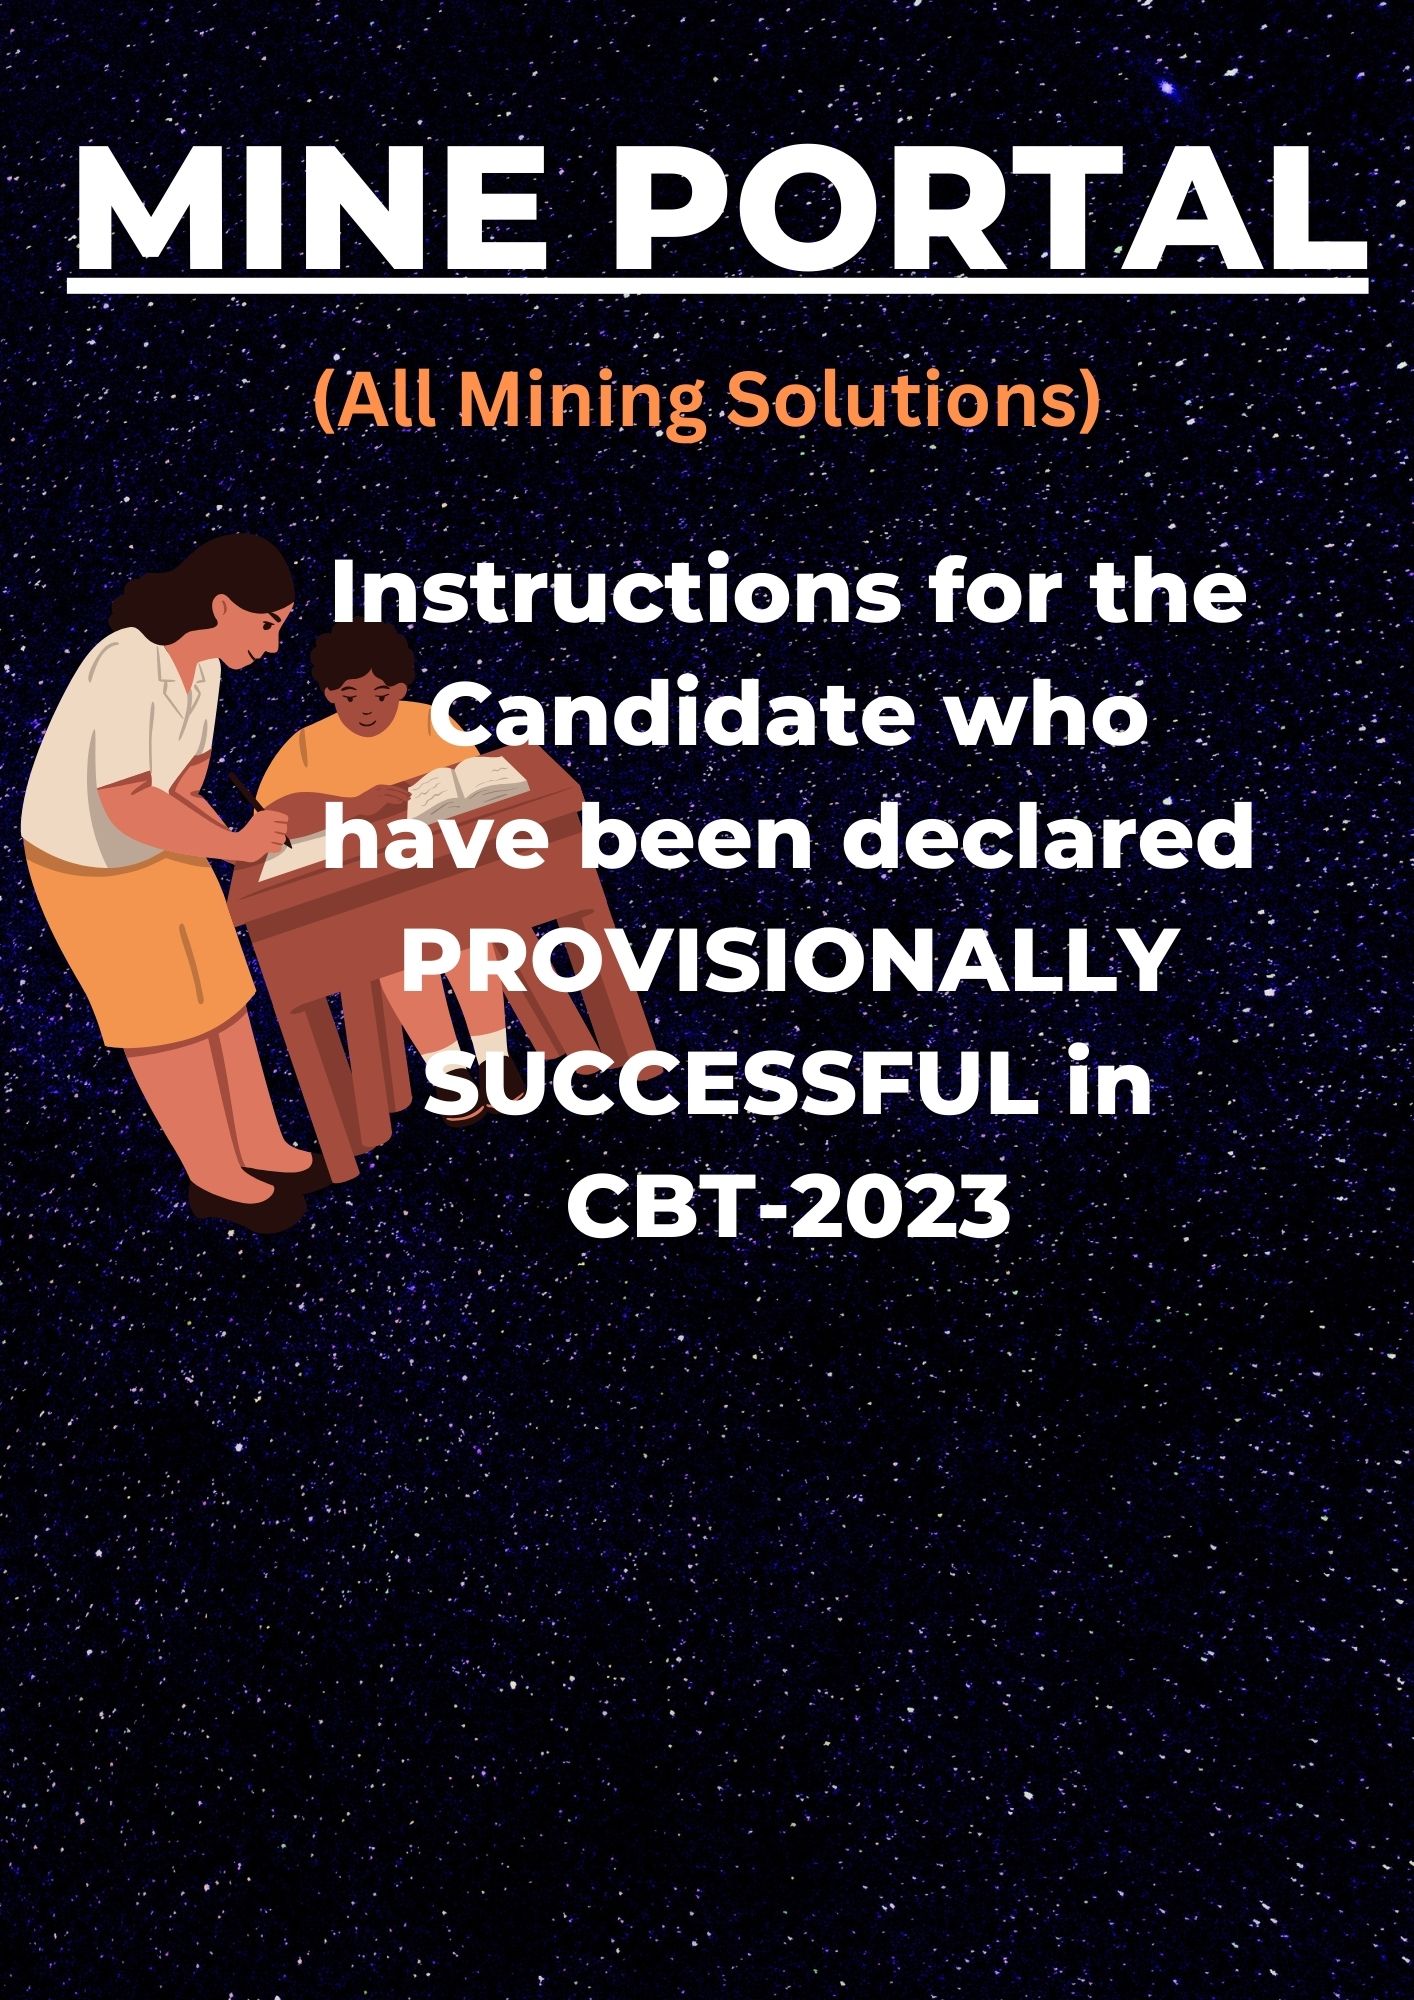 Instructions for the Candidate who have been declared PROVISIONALLY SUCCESSFUL in CBT-2023